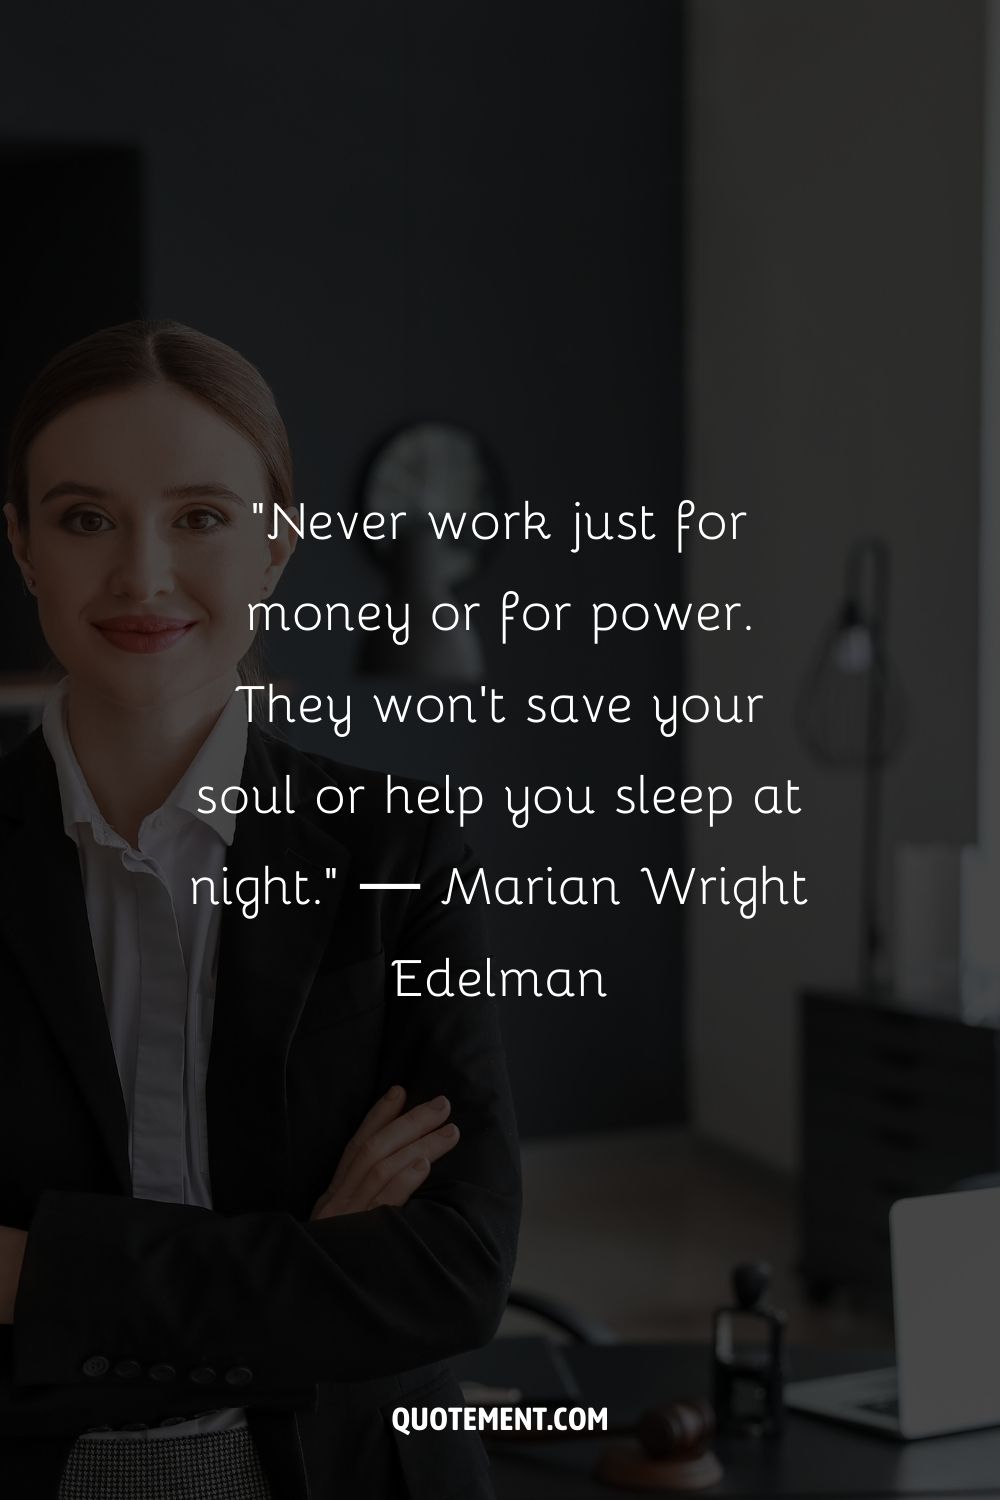 “Never work just for money or for power. They won't save your soul or help you sleep at night.” ― Marian Wright Edelman